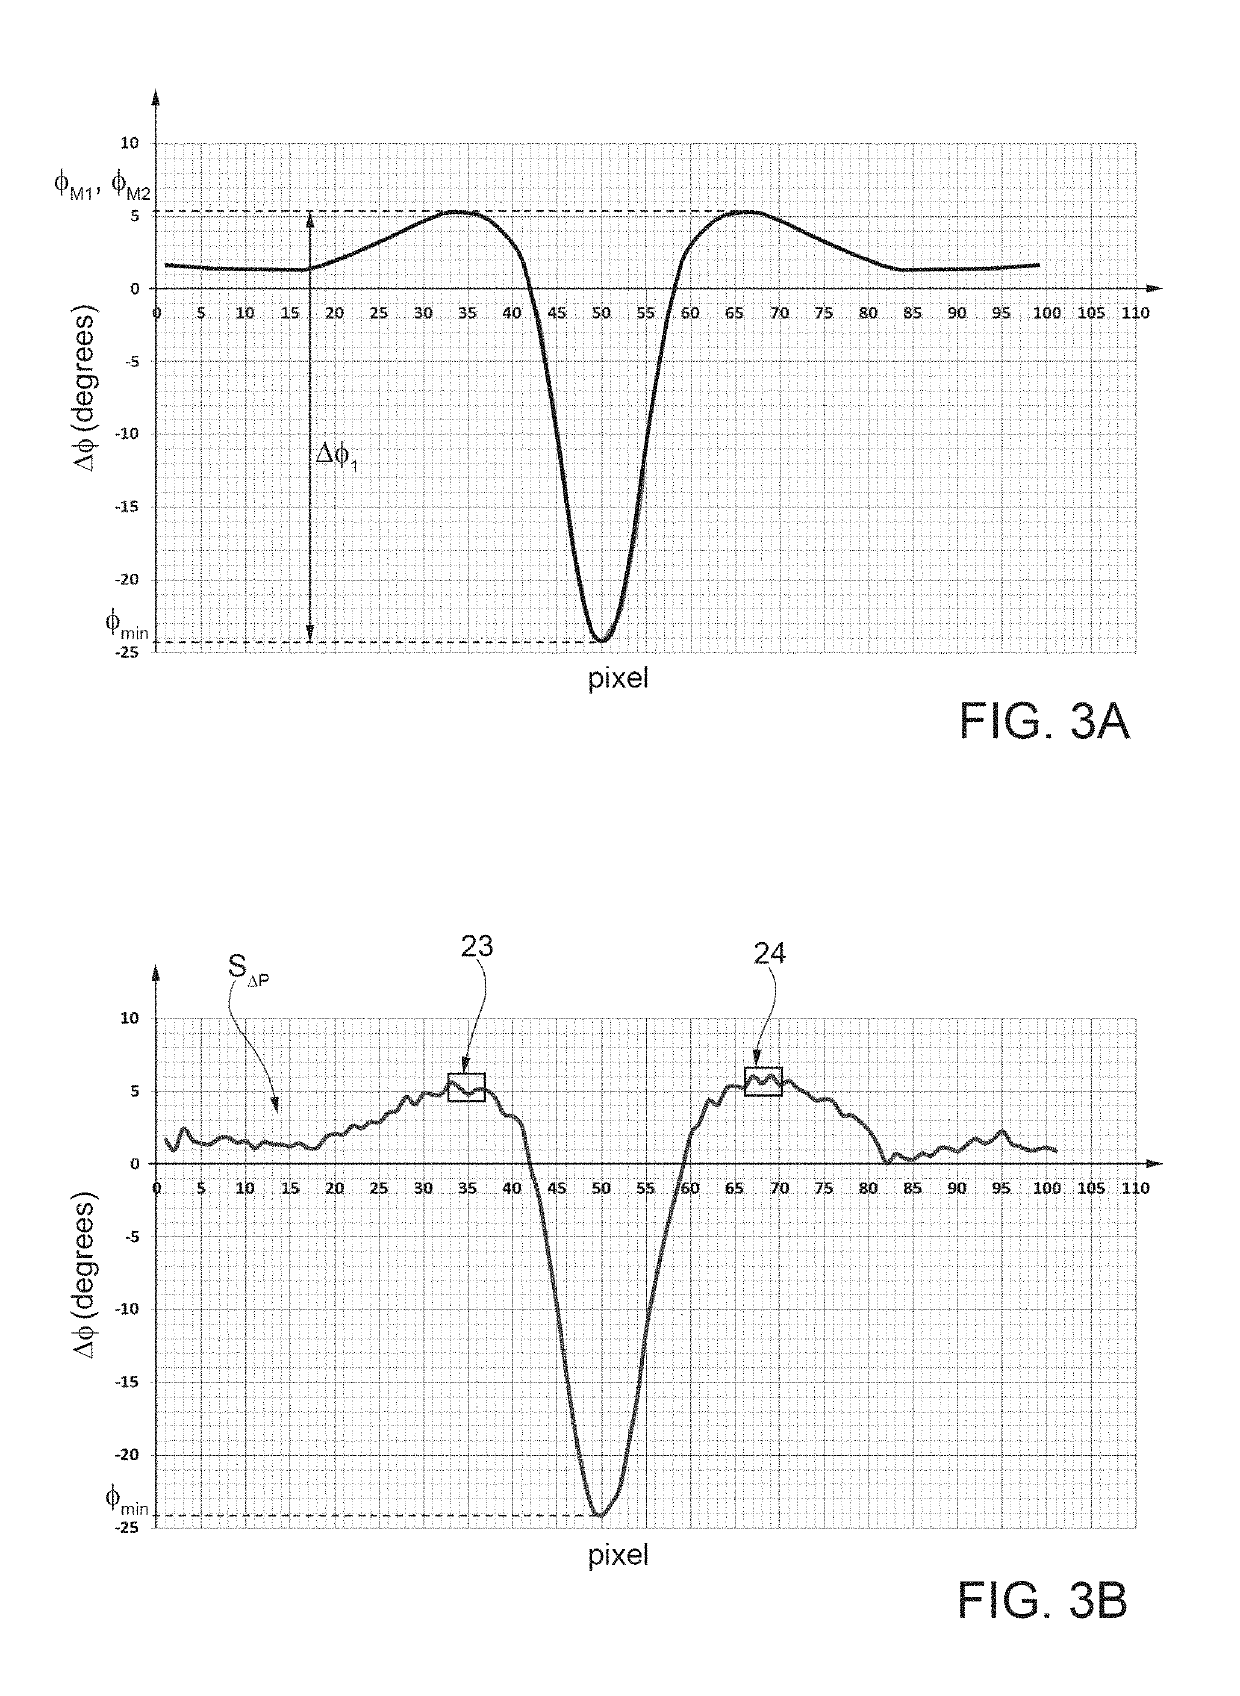 Method and system of thermographic non-destructive inspection for detecting and measuring volumetric defects in composite material structures